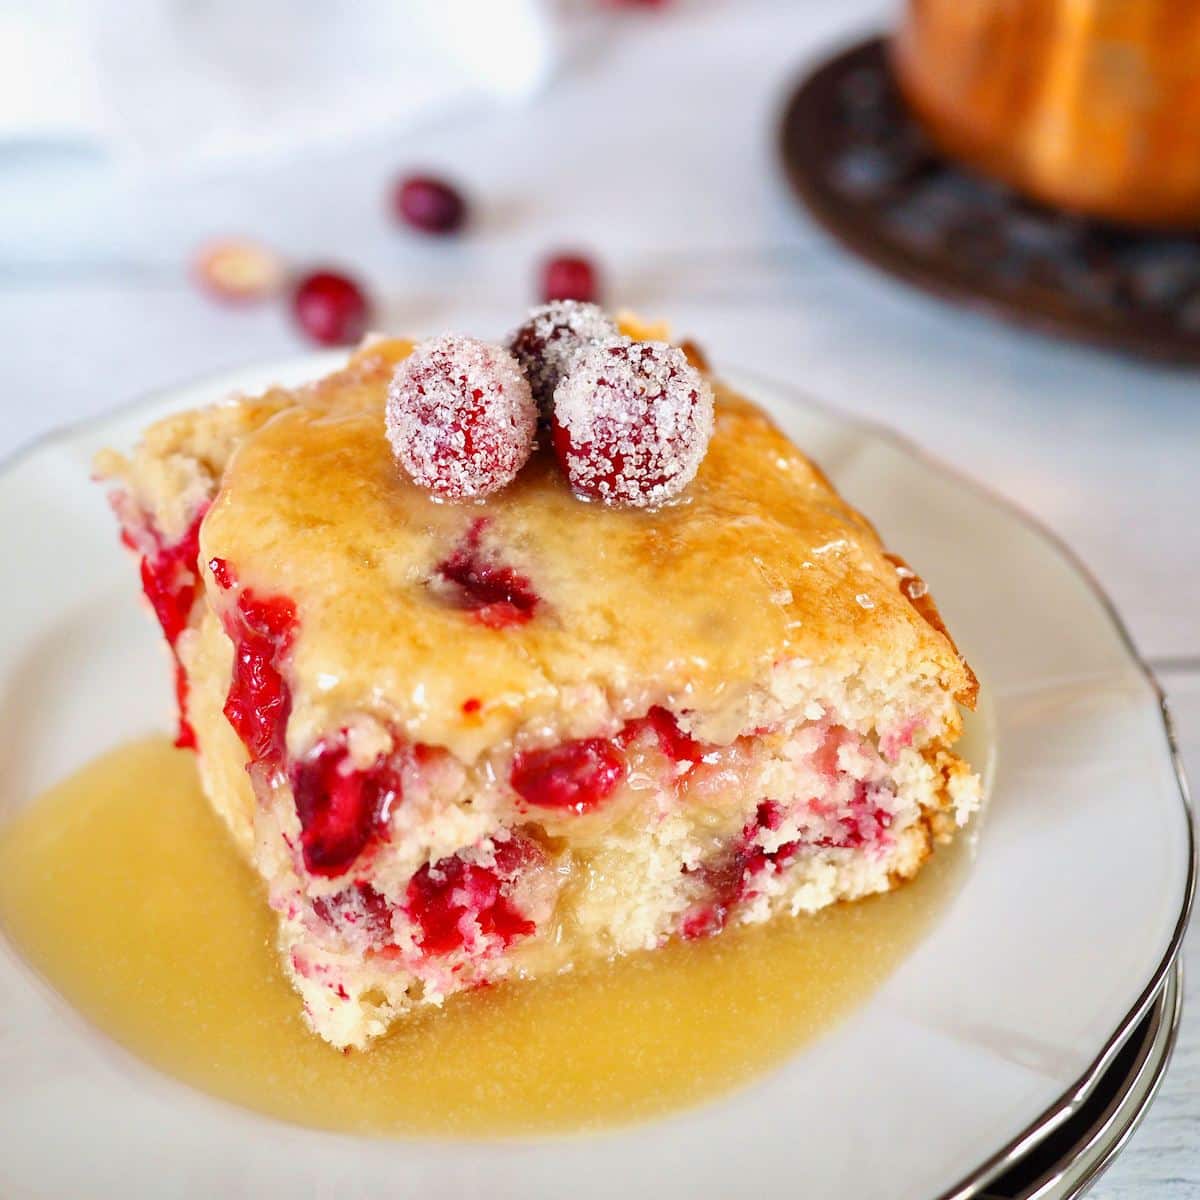 Slice of cranberry cake with butter sauce and topped with sugared cranberries.